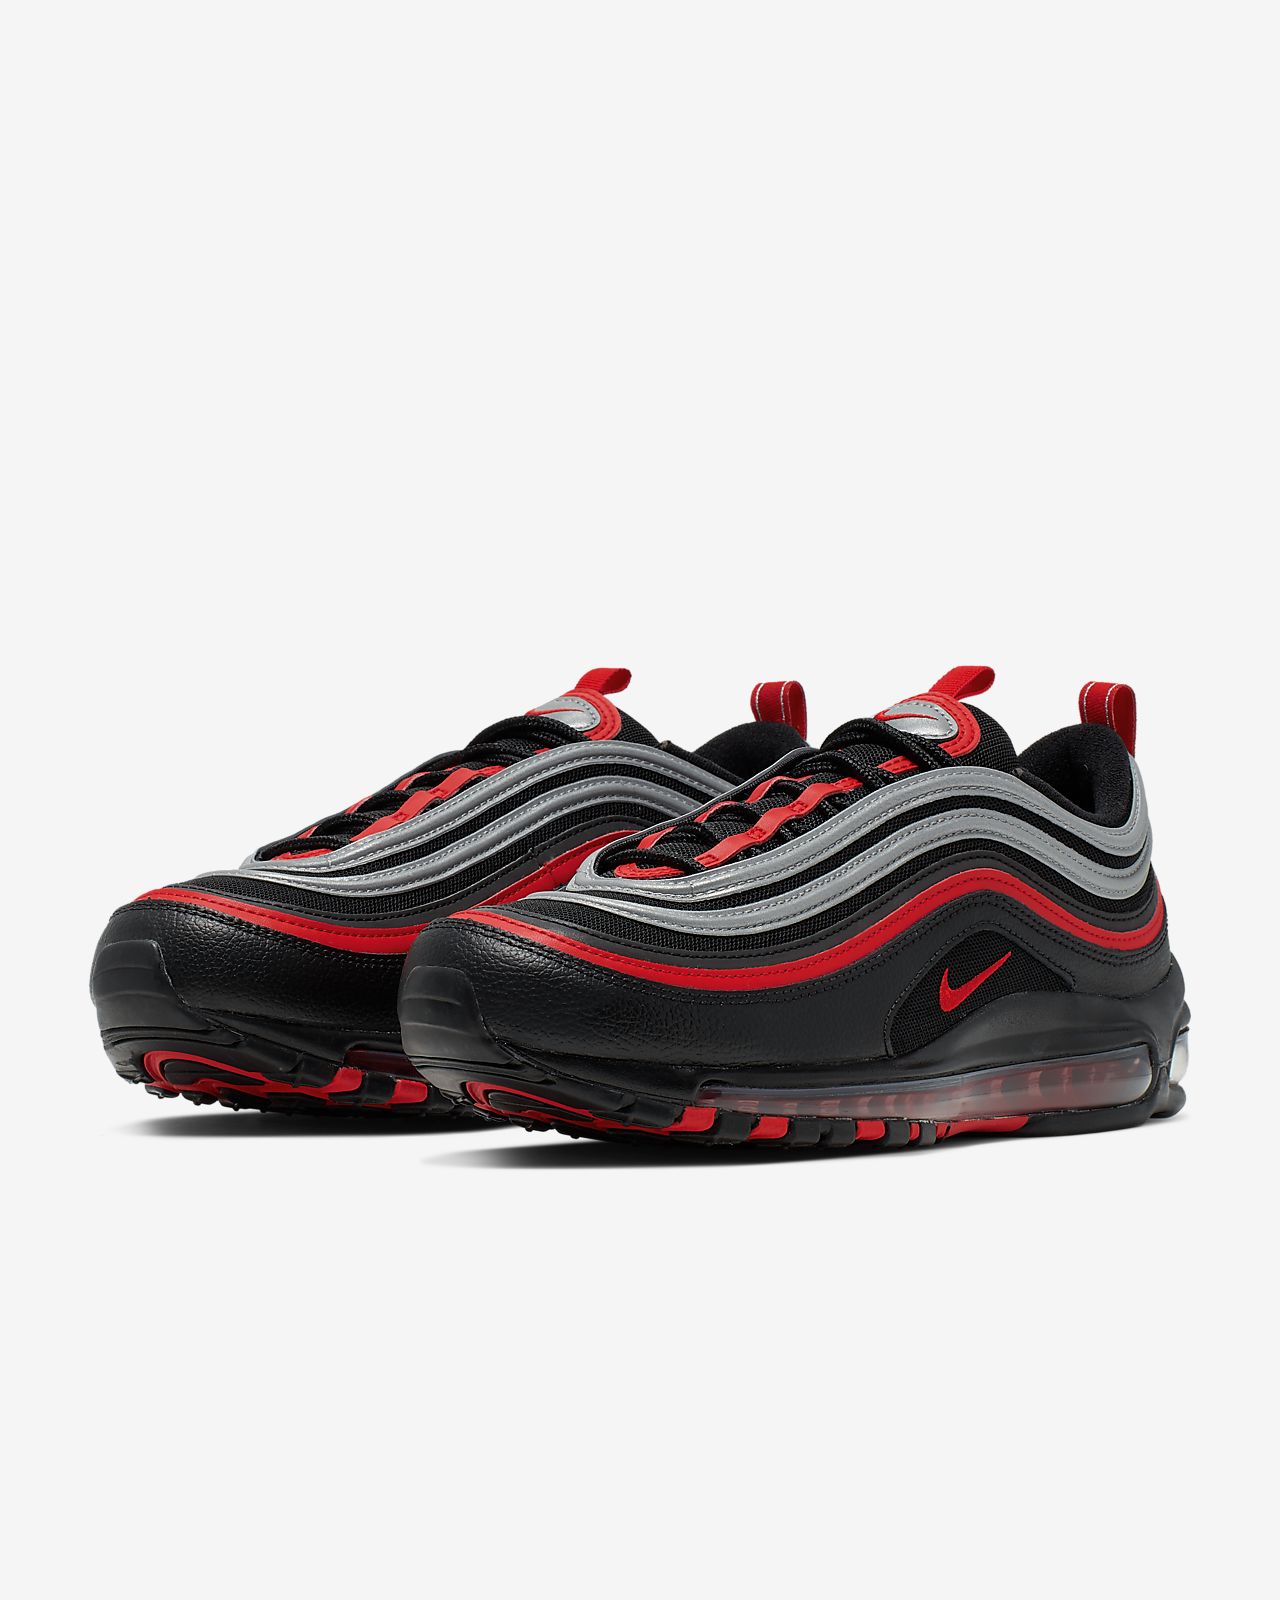 air max 97 reflective trainer black / university red